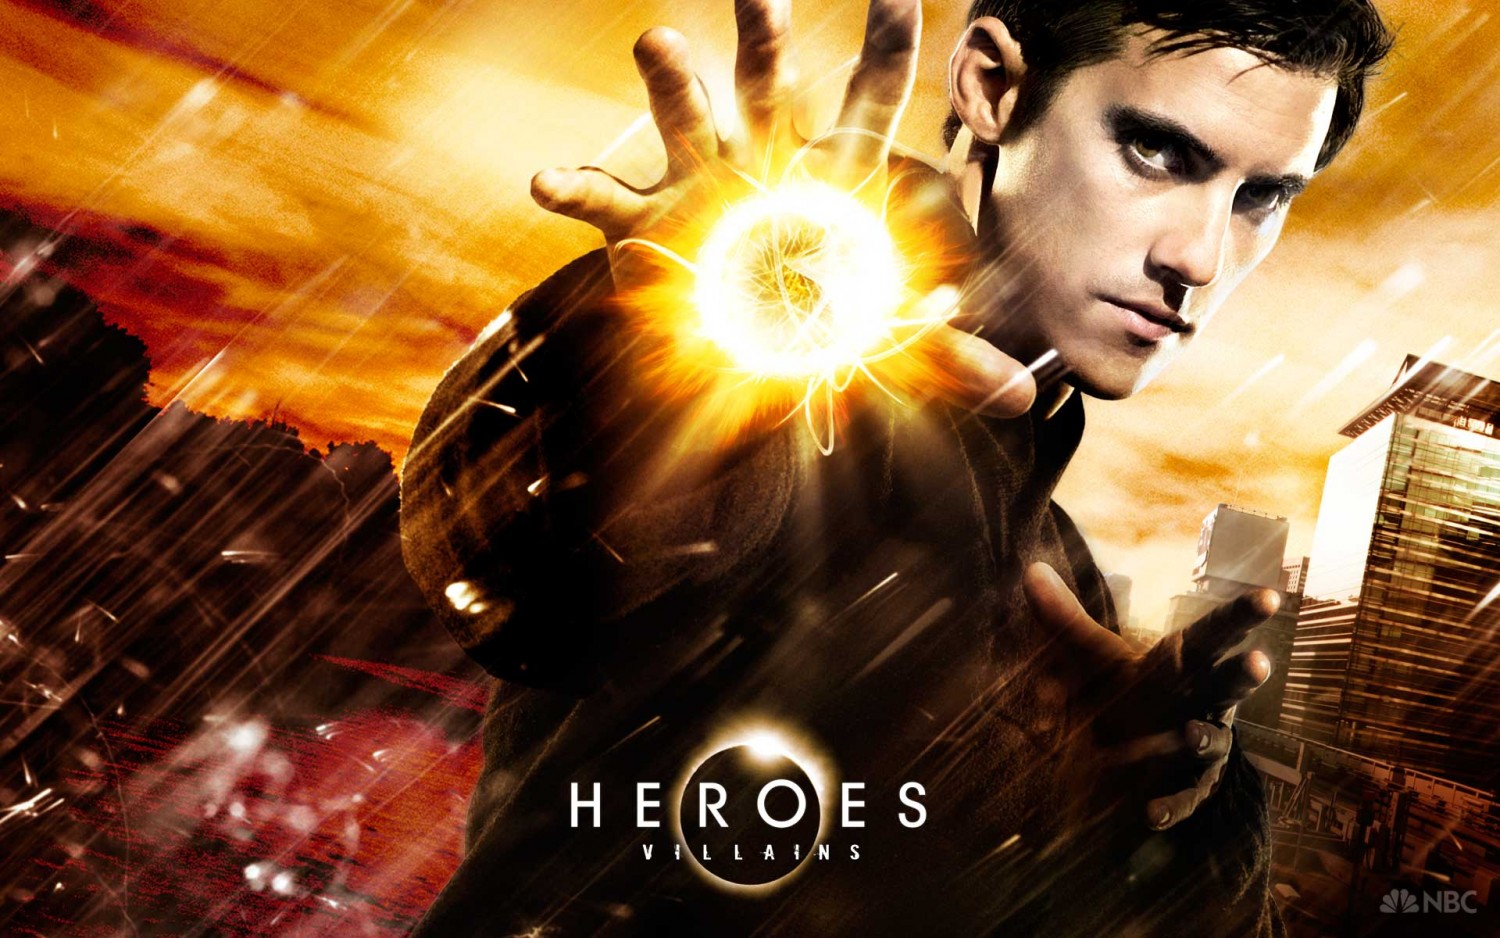 NBC Reviving “Heroes”: Four TV Series That Need To Come Back